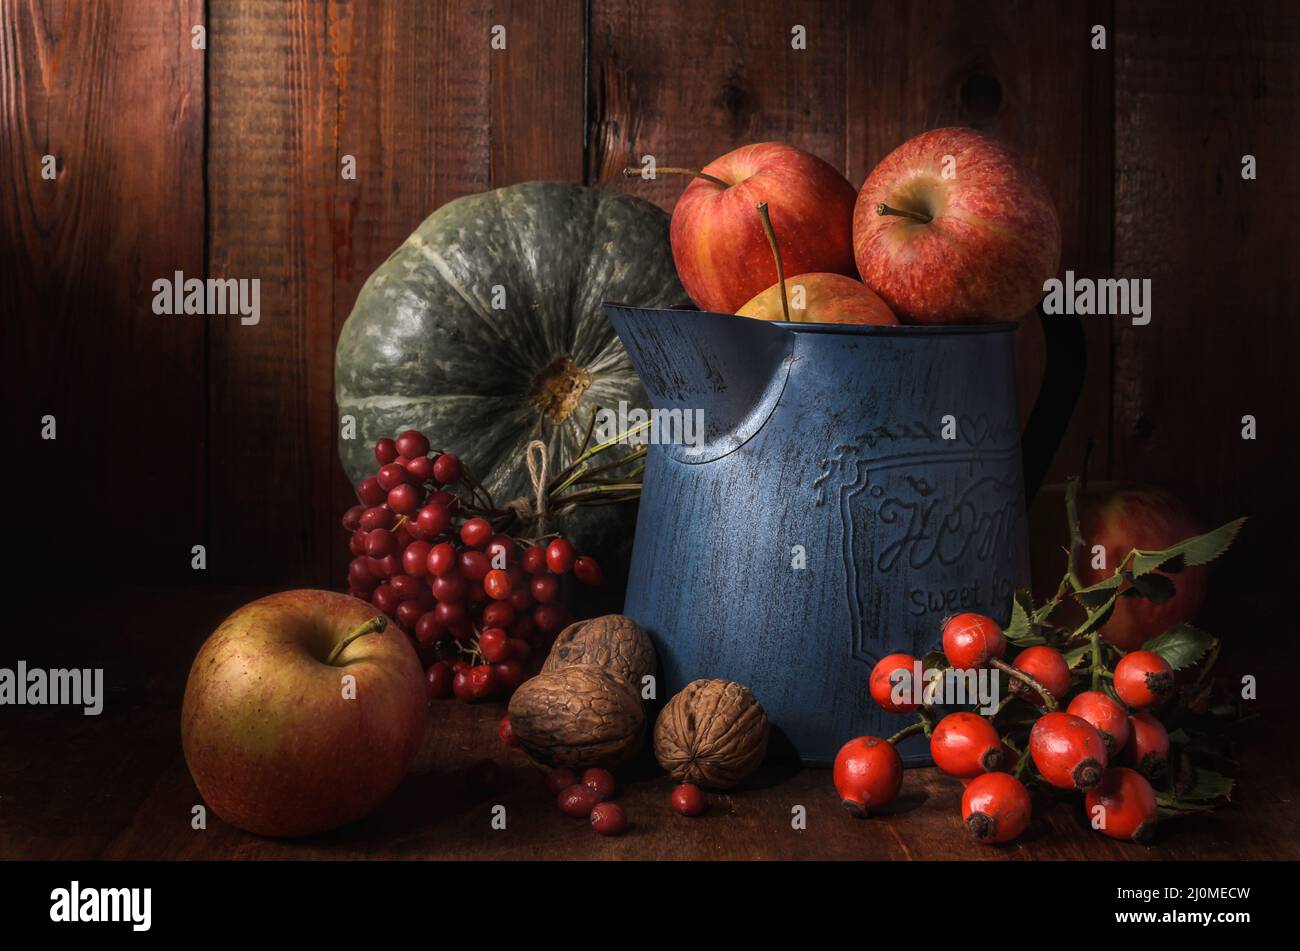 Apples in a garden jug on a dark wooden background in a rustic style Stock Photo